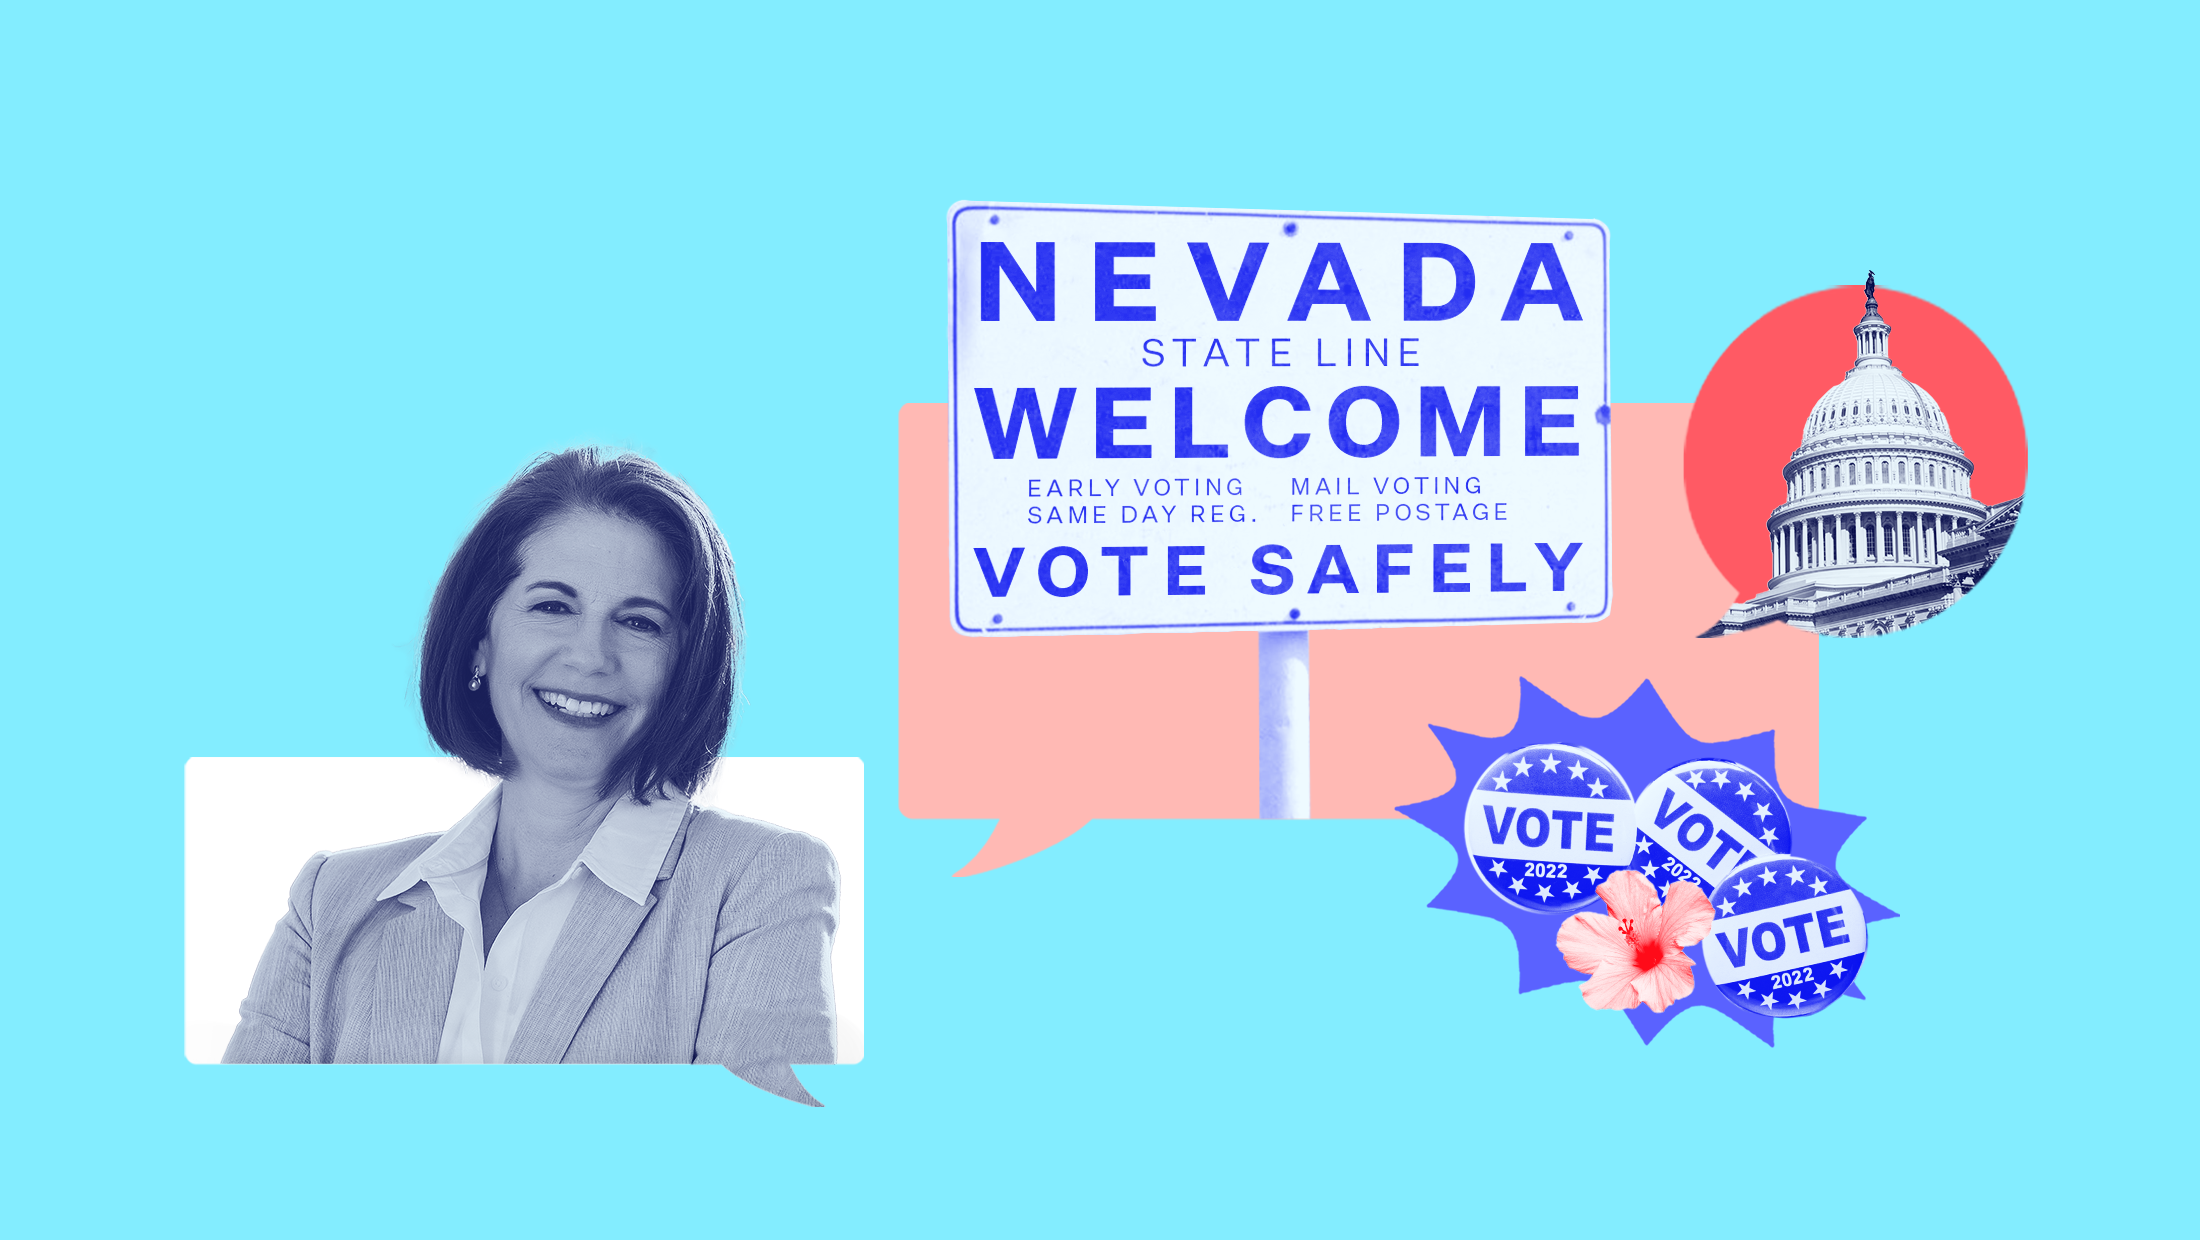 Light blue background with blue-toned image of Sen. Catherine Cortez Masto, a sign that reads "Nevada State Line Early Voting, Same Day Reg., Mail Voting, Free Postage, Welcome, Vote Safely", a blue-toned image of the U.S. Capitol, three vote stickers and a pink Hawaiian hibiscus flower.